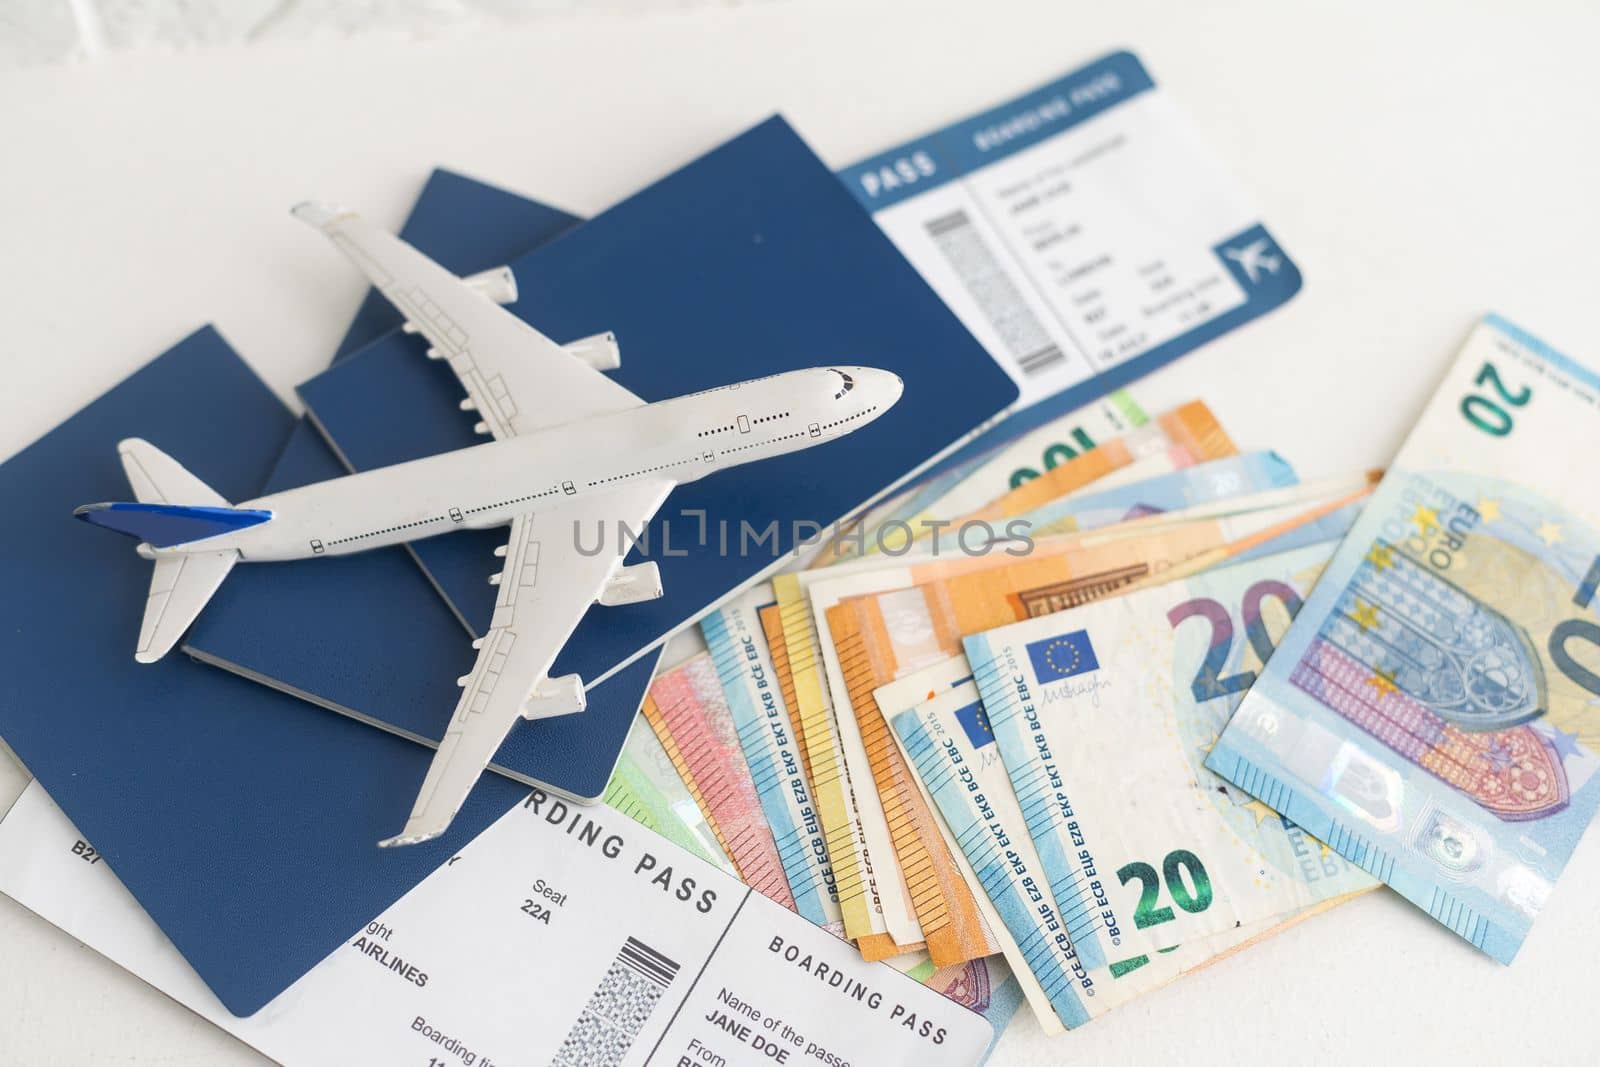 Airline tickets and documents on white background.